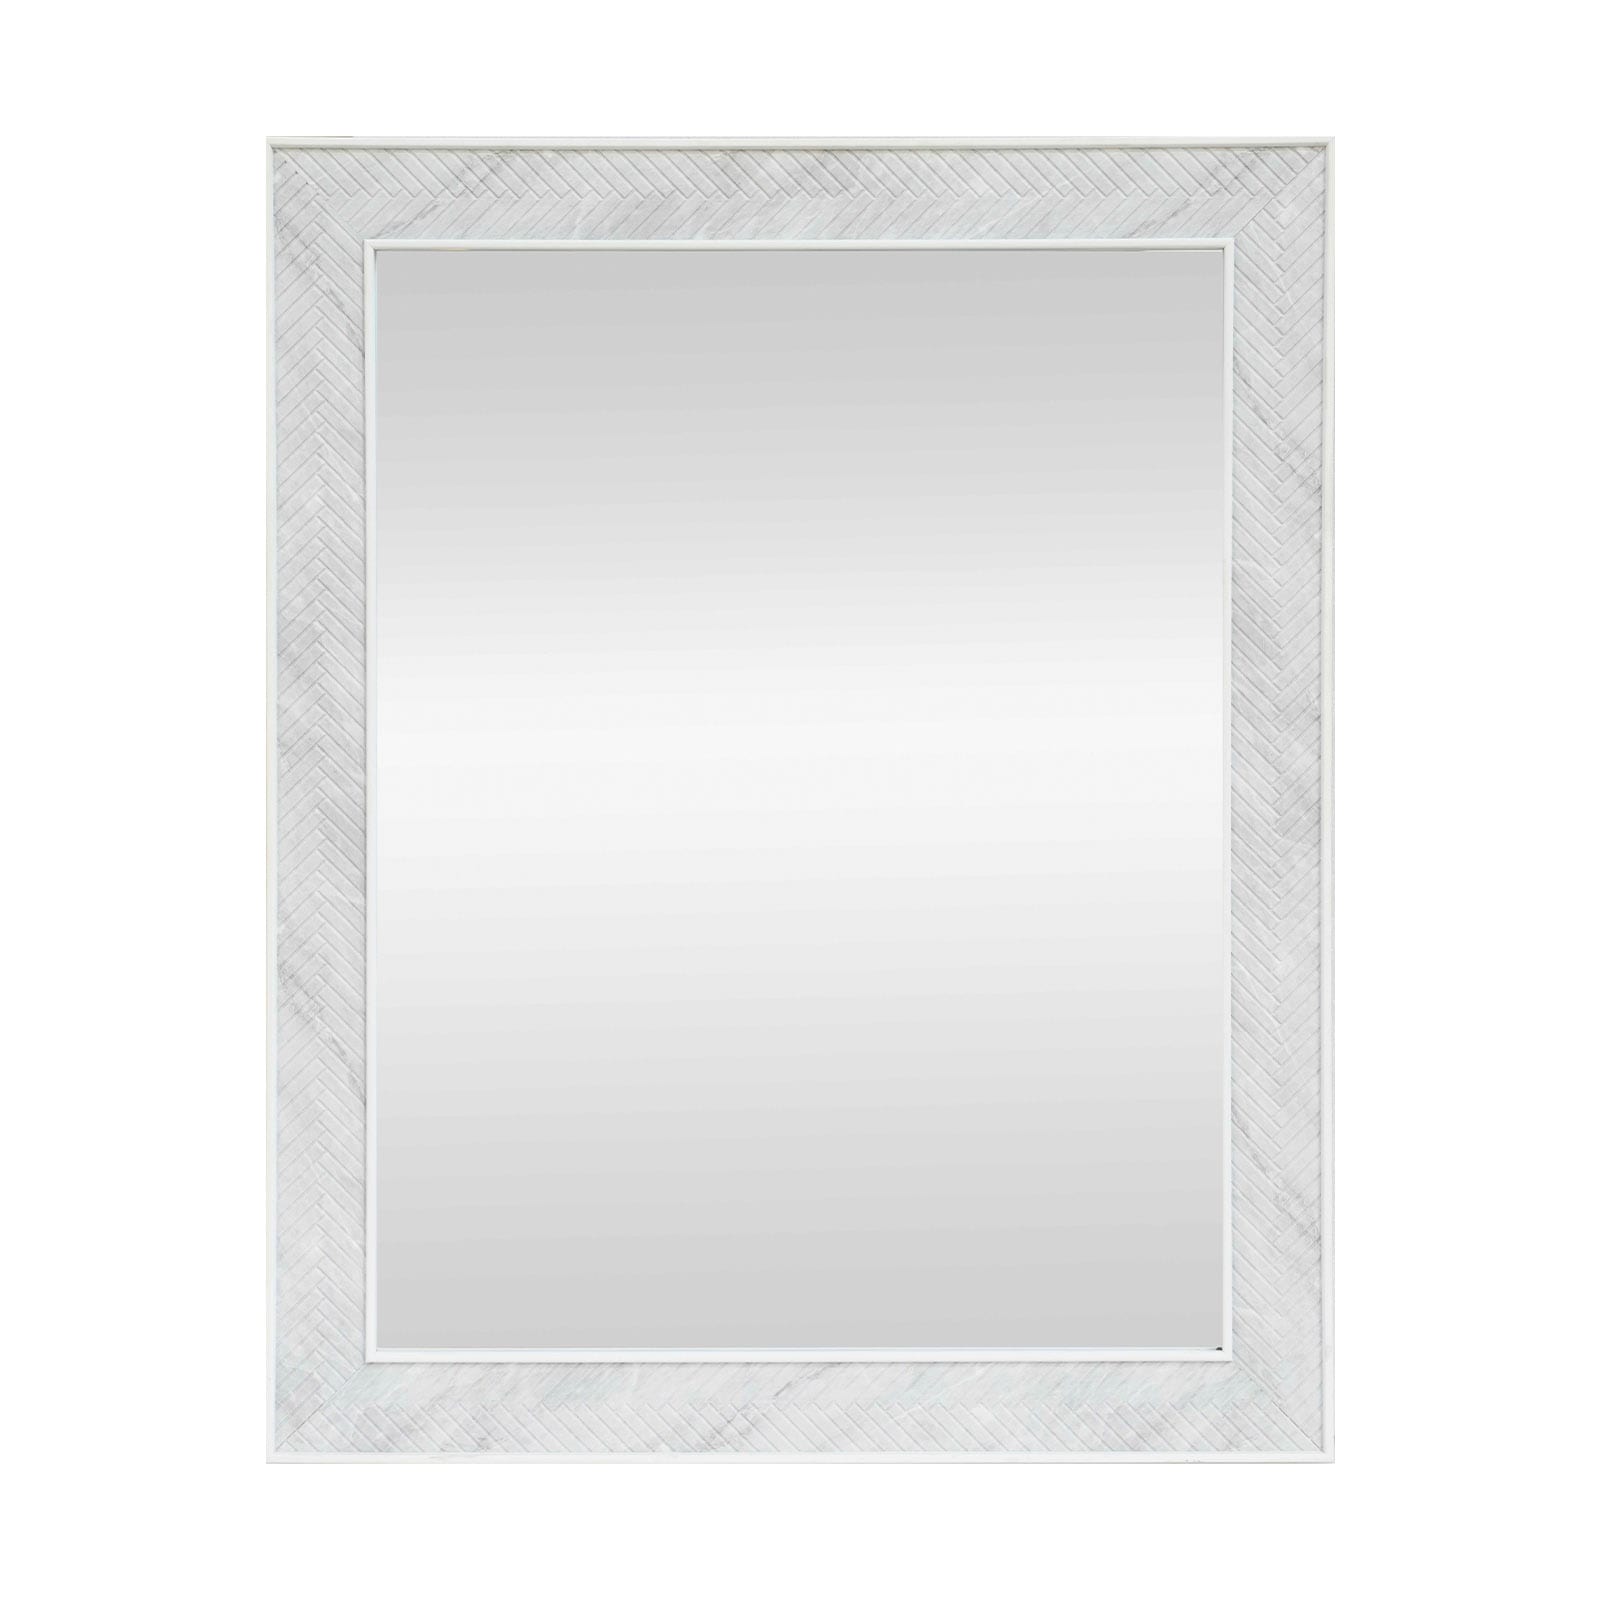 Mirror Frames to Add Elegance to Your Interior - Qube art gallery